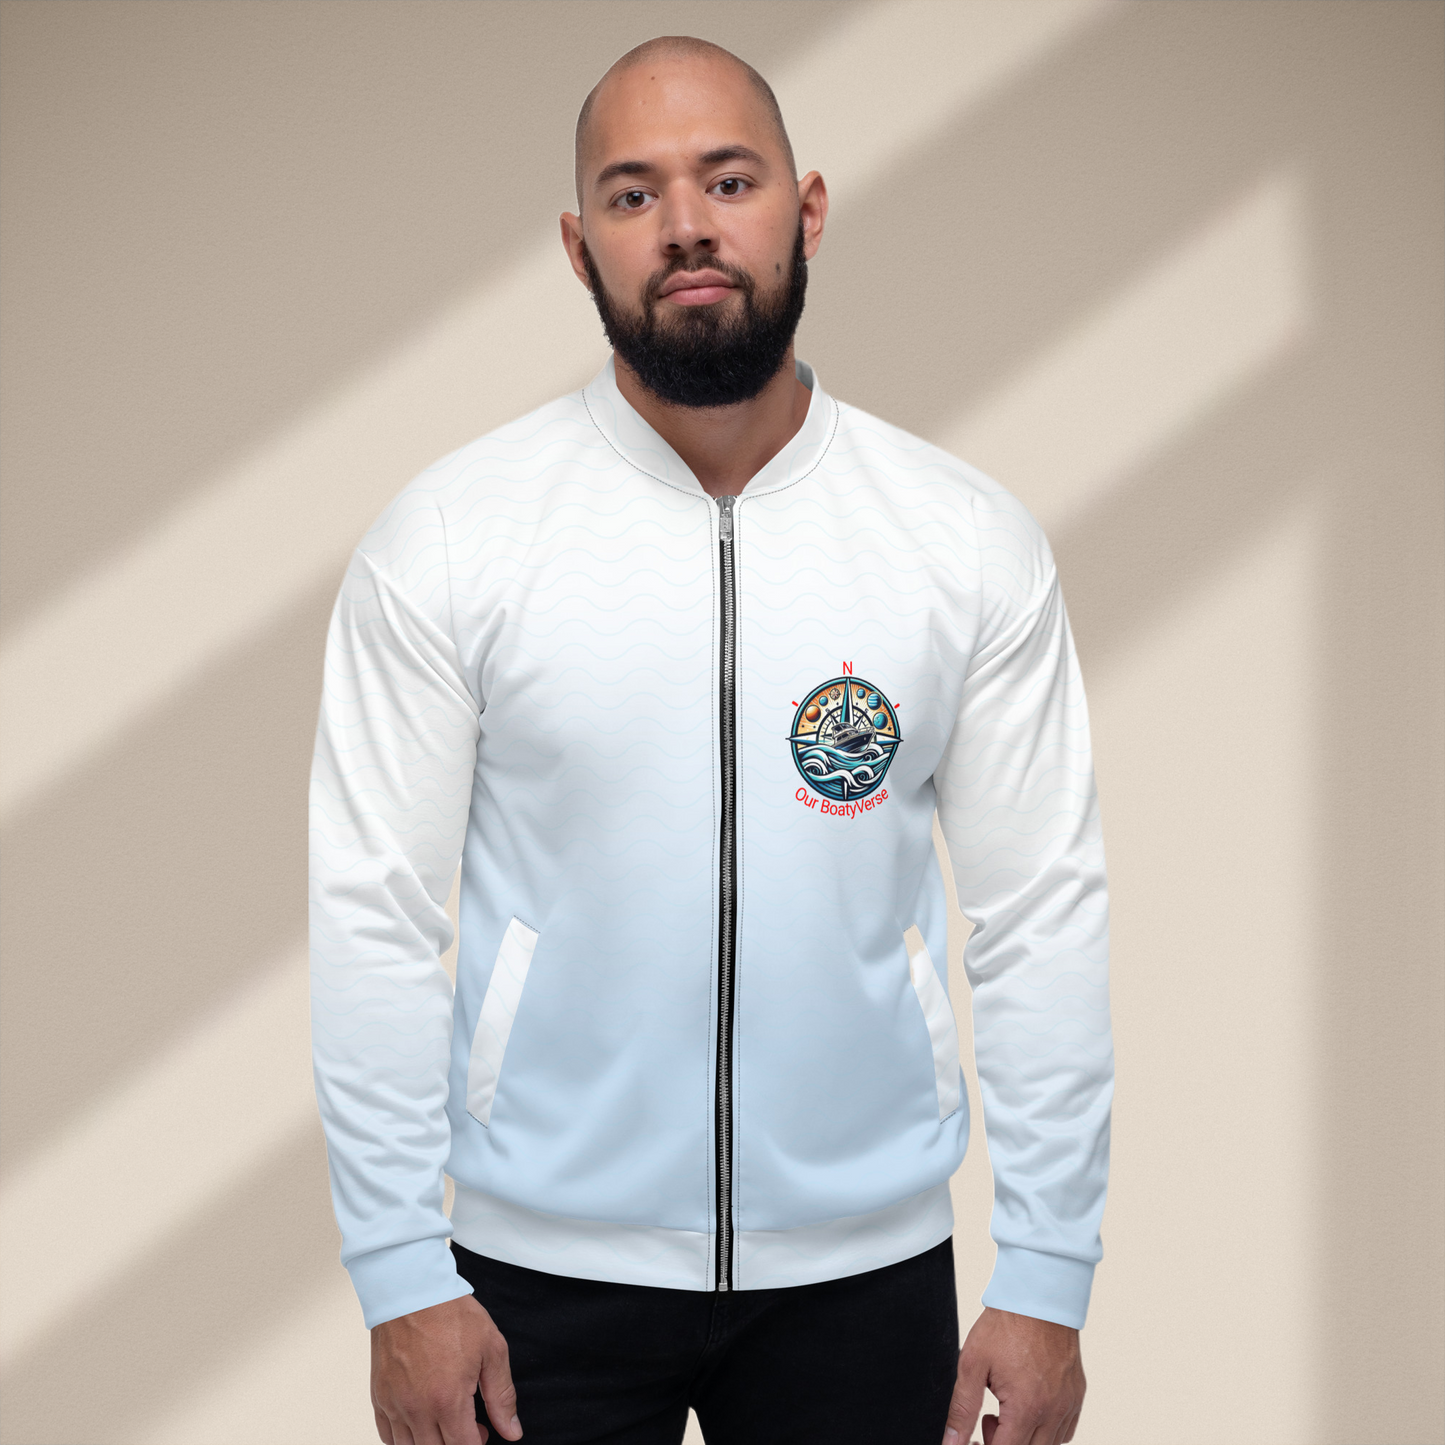 The Ocean Wave Bomber Jacket by Our BoatyVerse